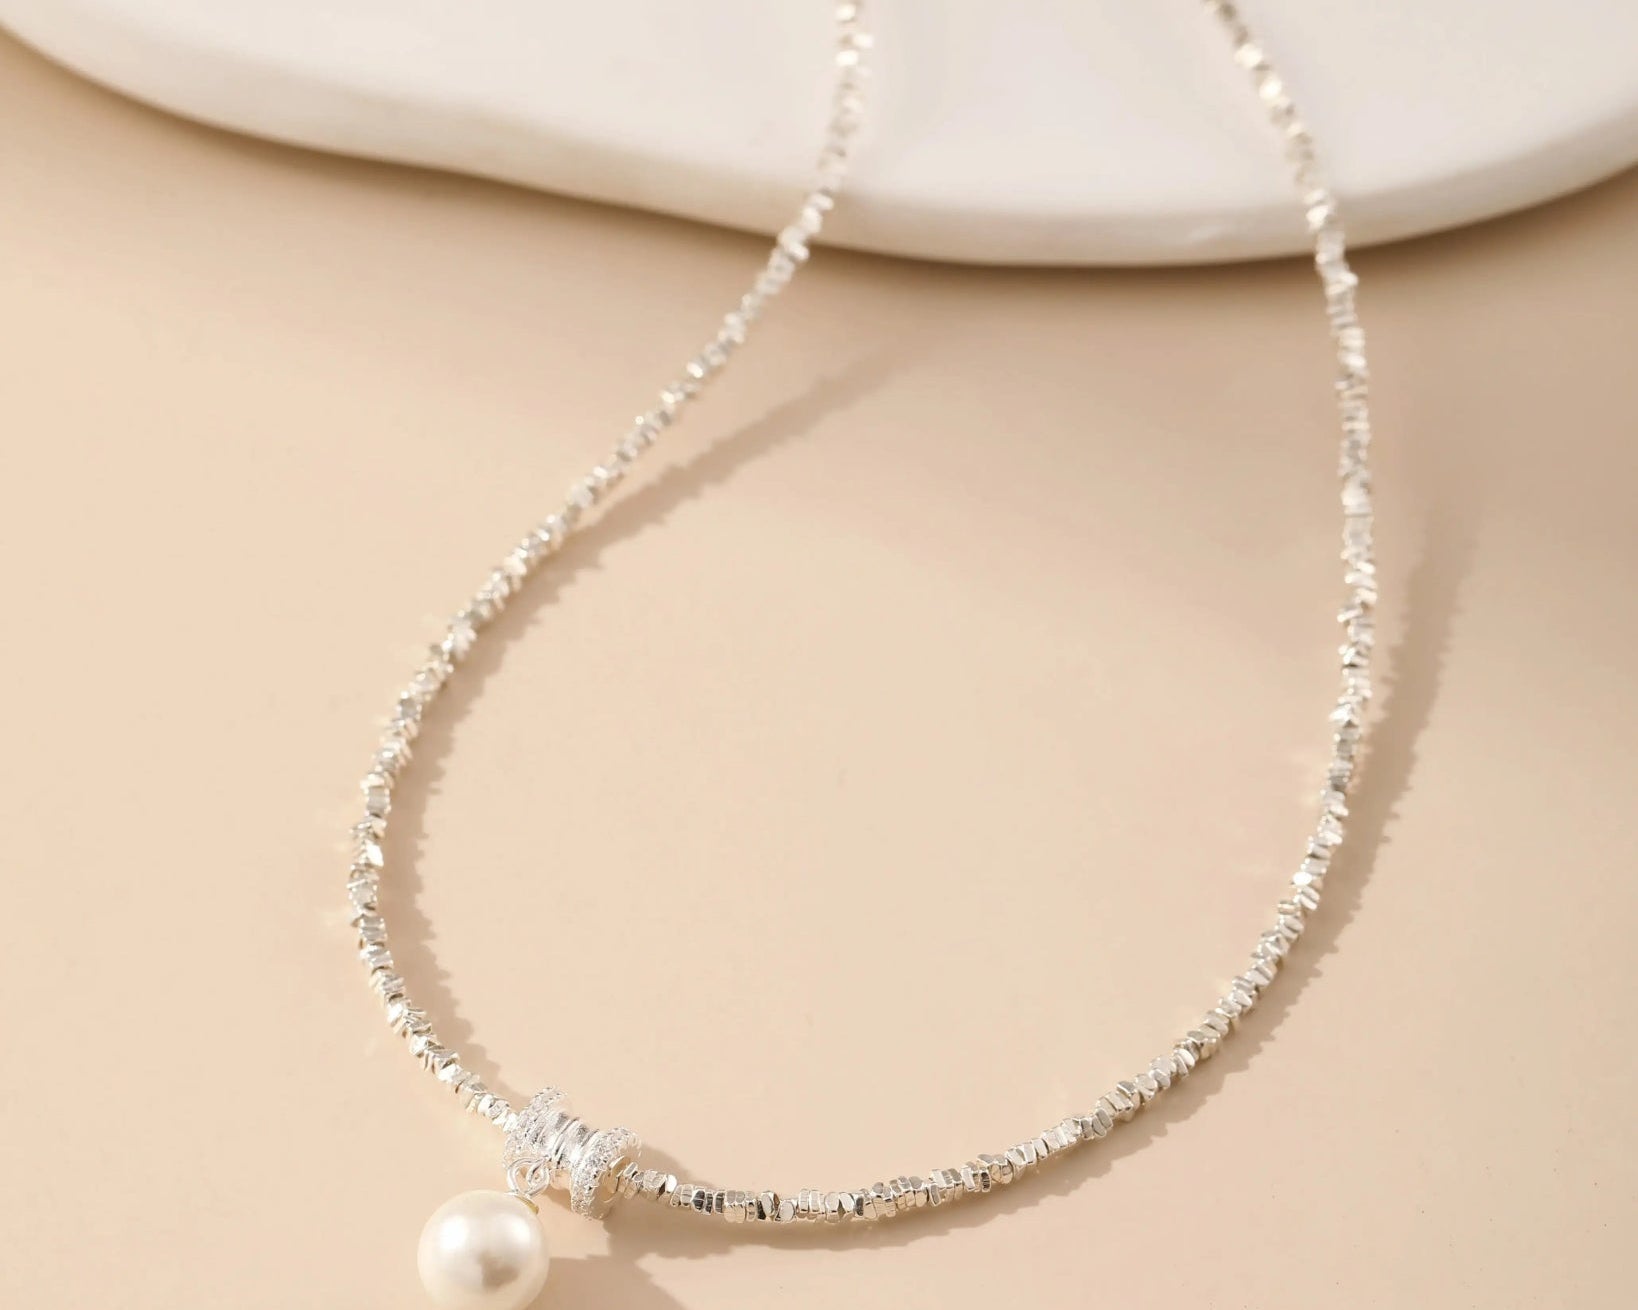 French Pearl Shard Silver Necklace - Alarita